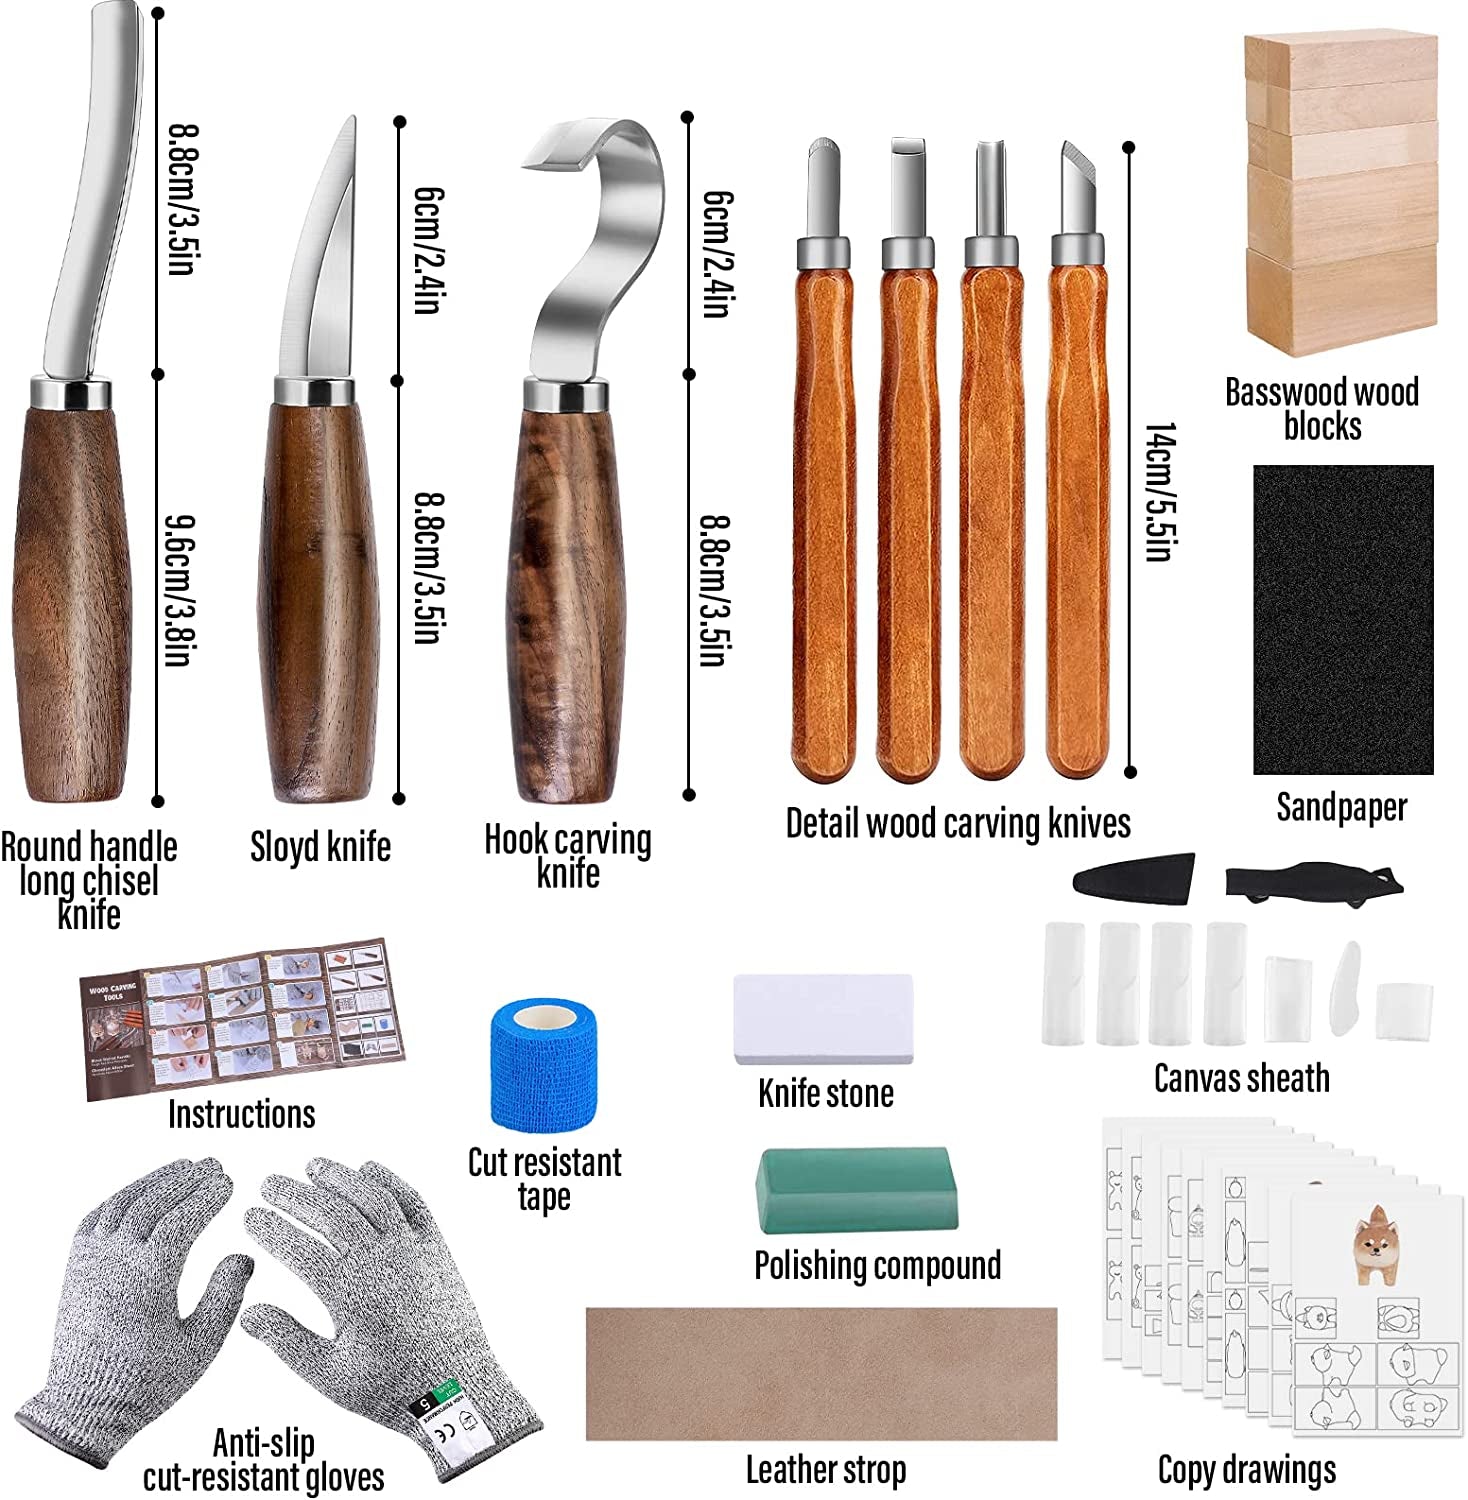 IMYMEE Wood Whittling Kit for Beginners-Complete Whittling Set with 4pcs  Wood Carving Knives & 8pcs Basswood Wood Blocks-Perfect Wood Carving Kit  Set-Includes Wood Carving Tools for Adults and Kids